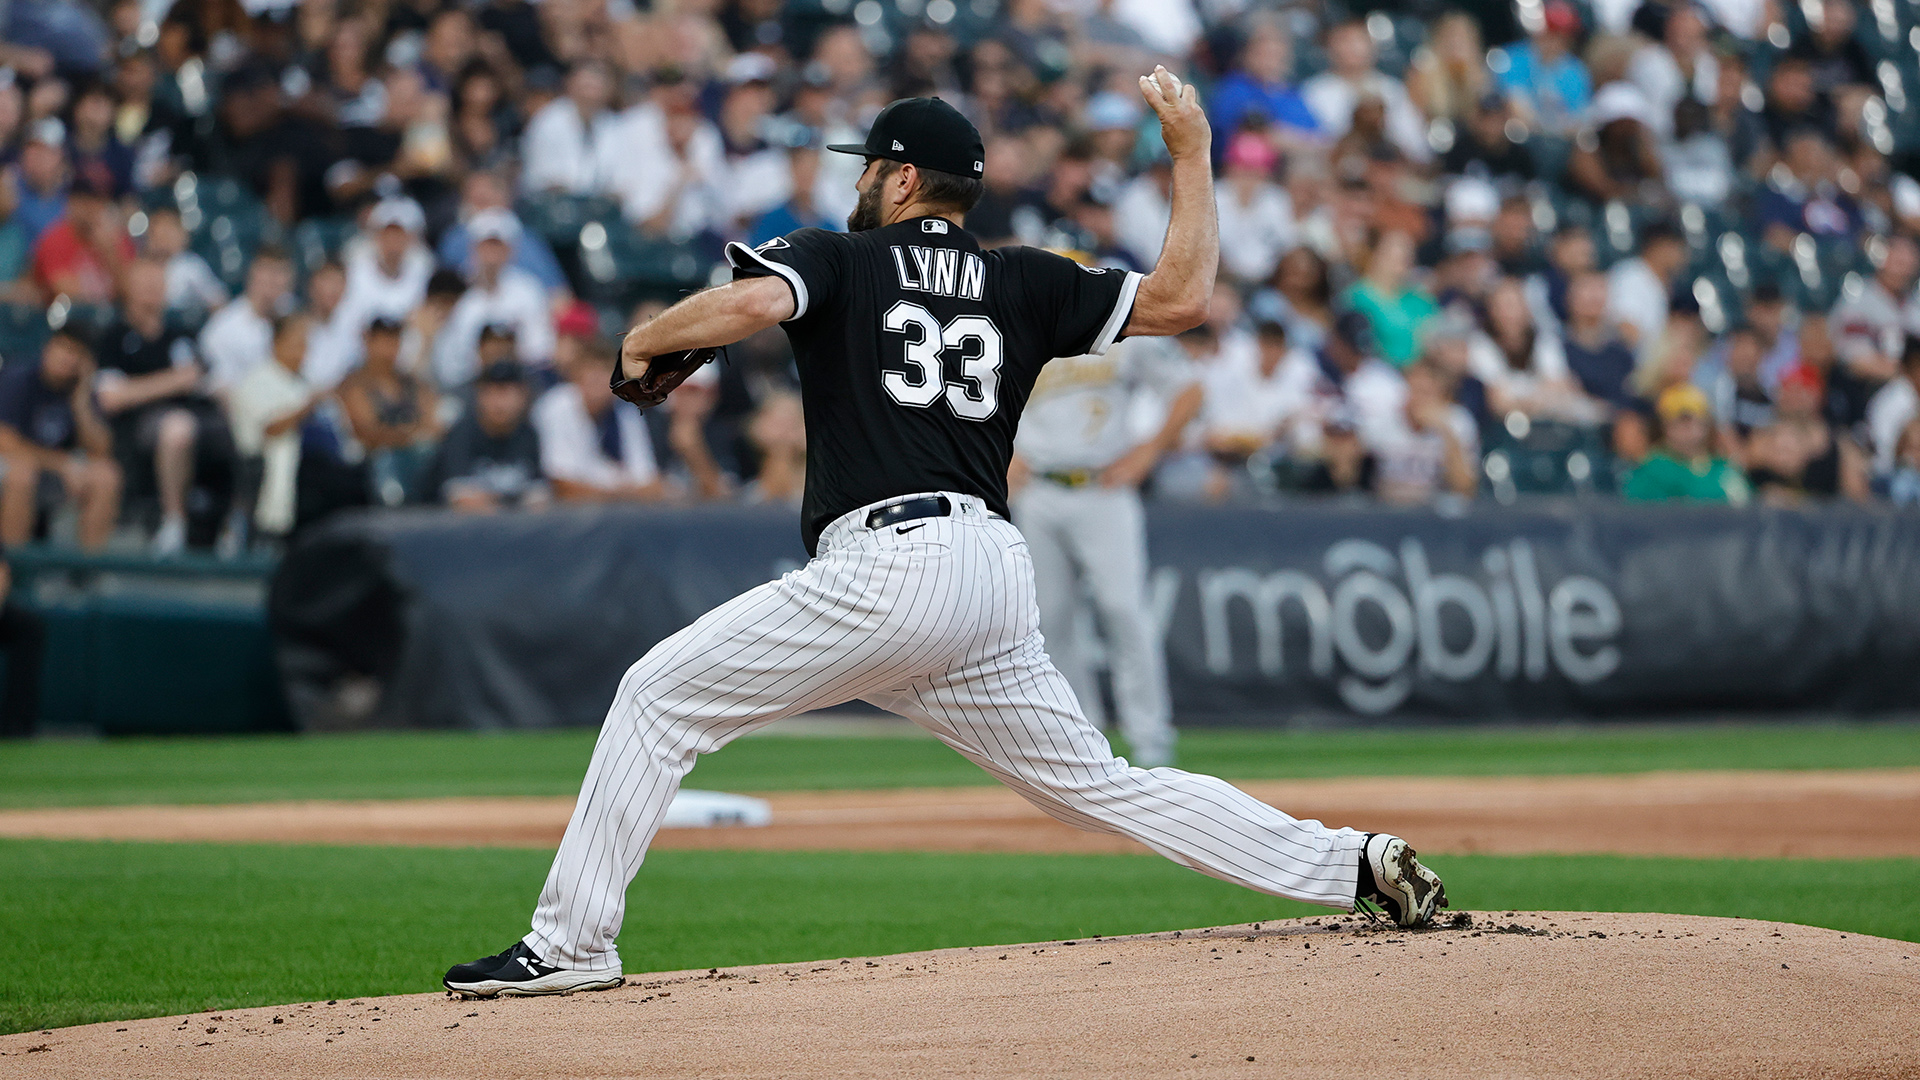 Why was White Sox pitcher Lance Lynn ejected?